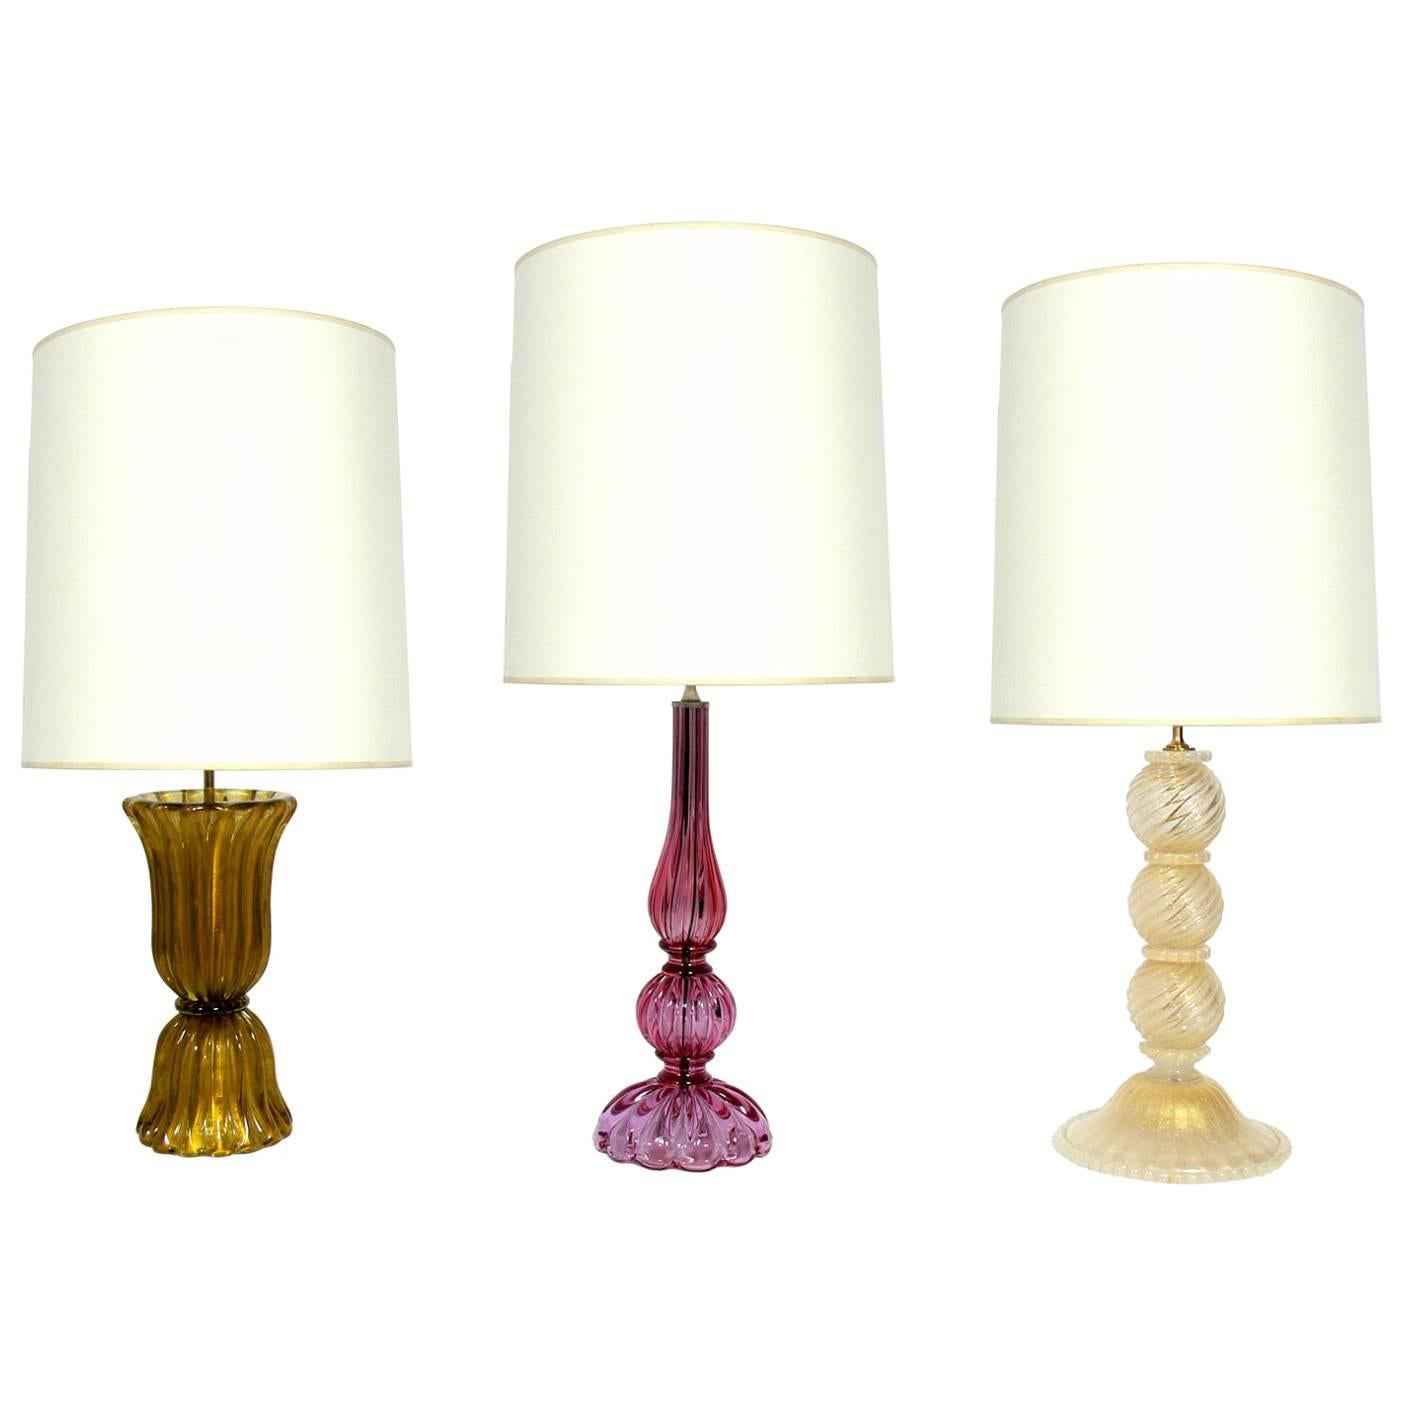 Selection of Murano Glass Lamps for Lorin Marsh 